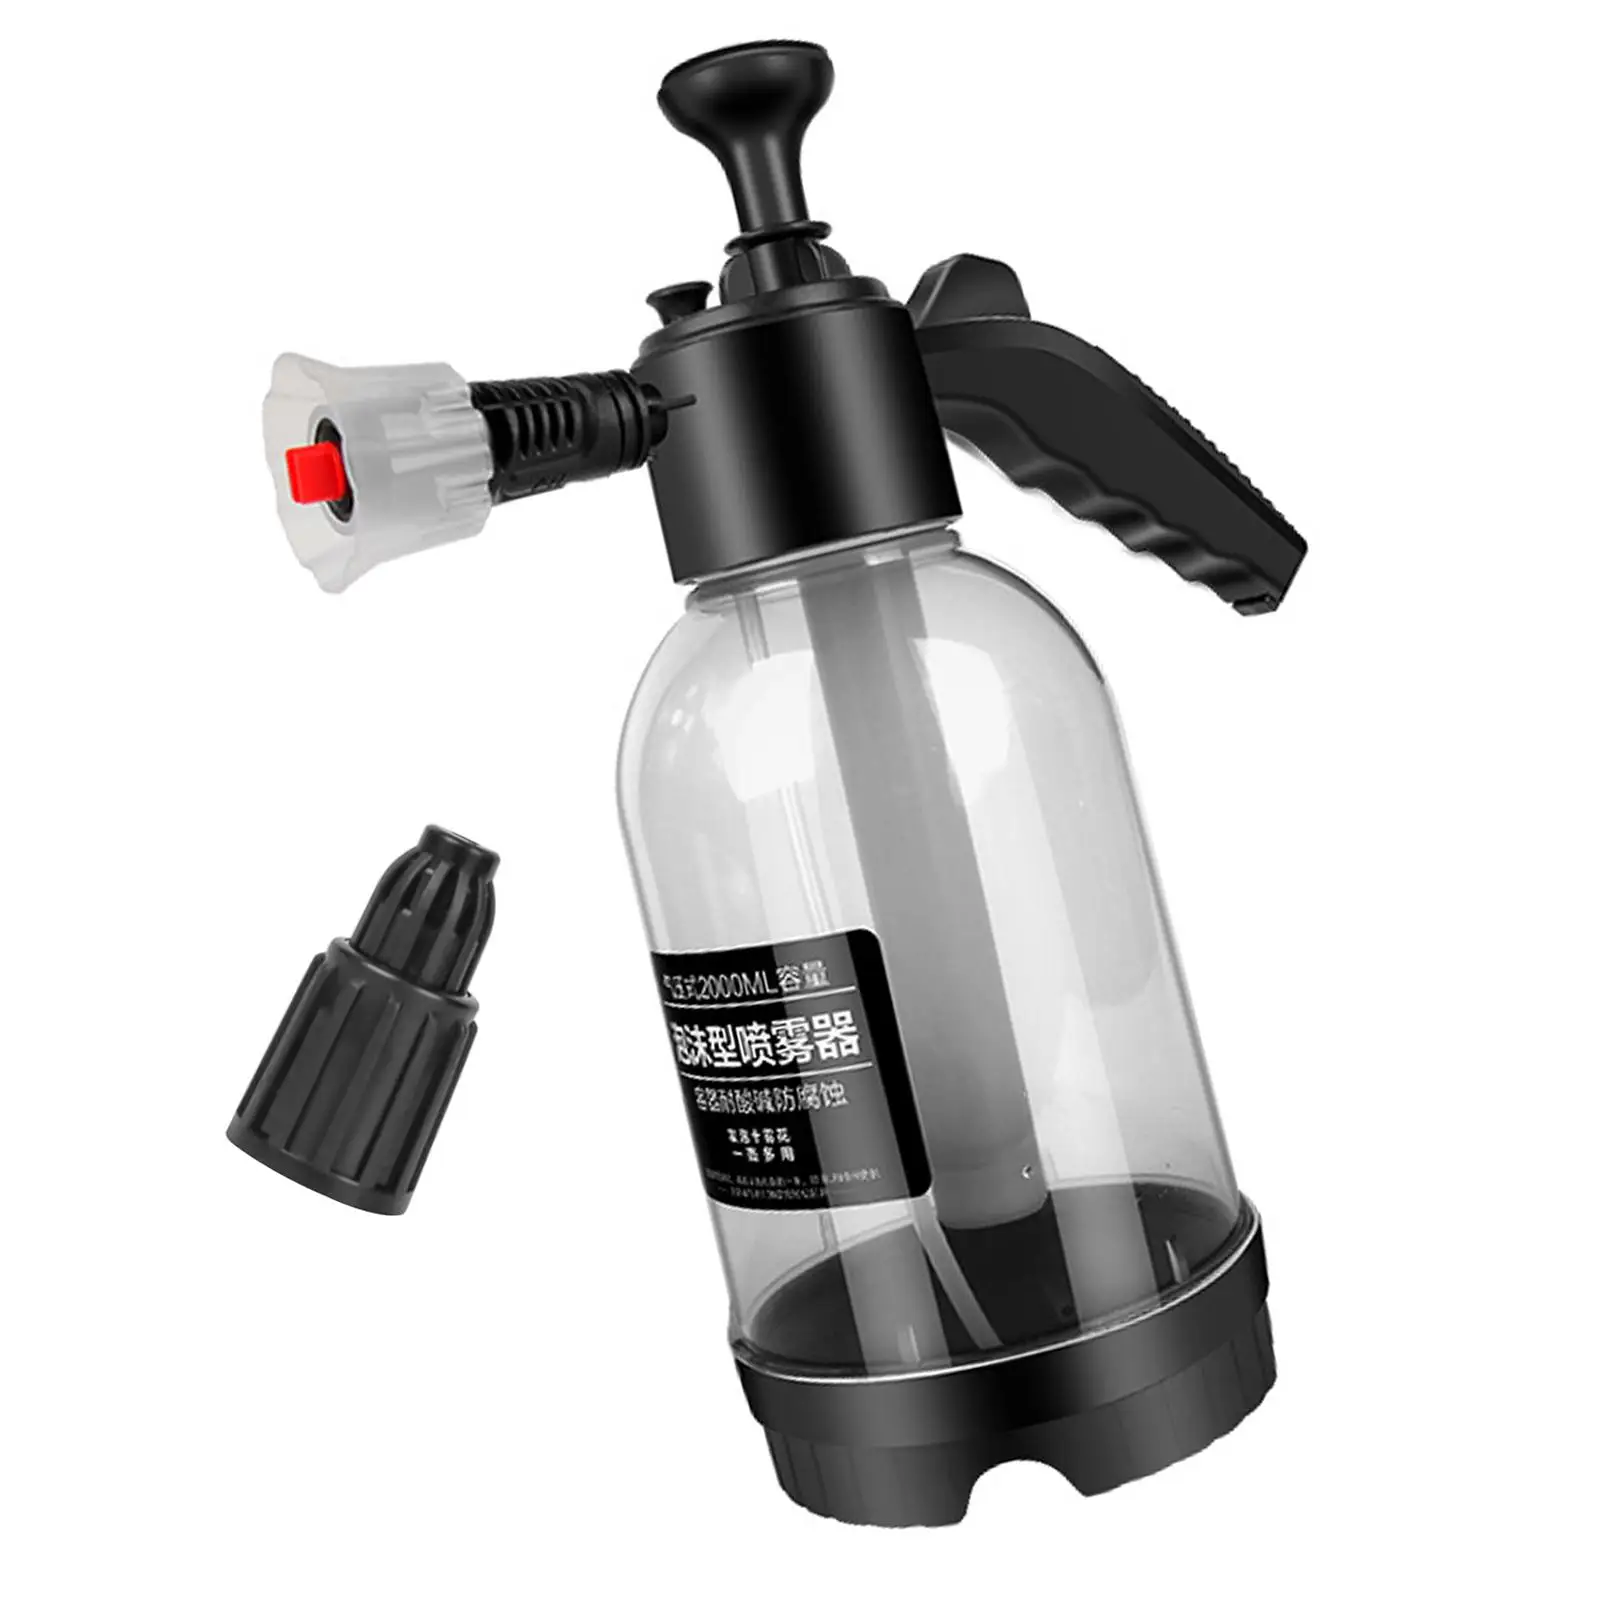 Portable Car Wash Foam Sprayer 2L Watering Can Multifunction Handheld for